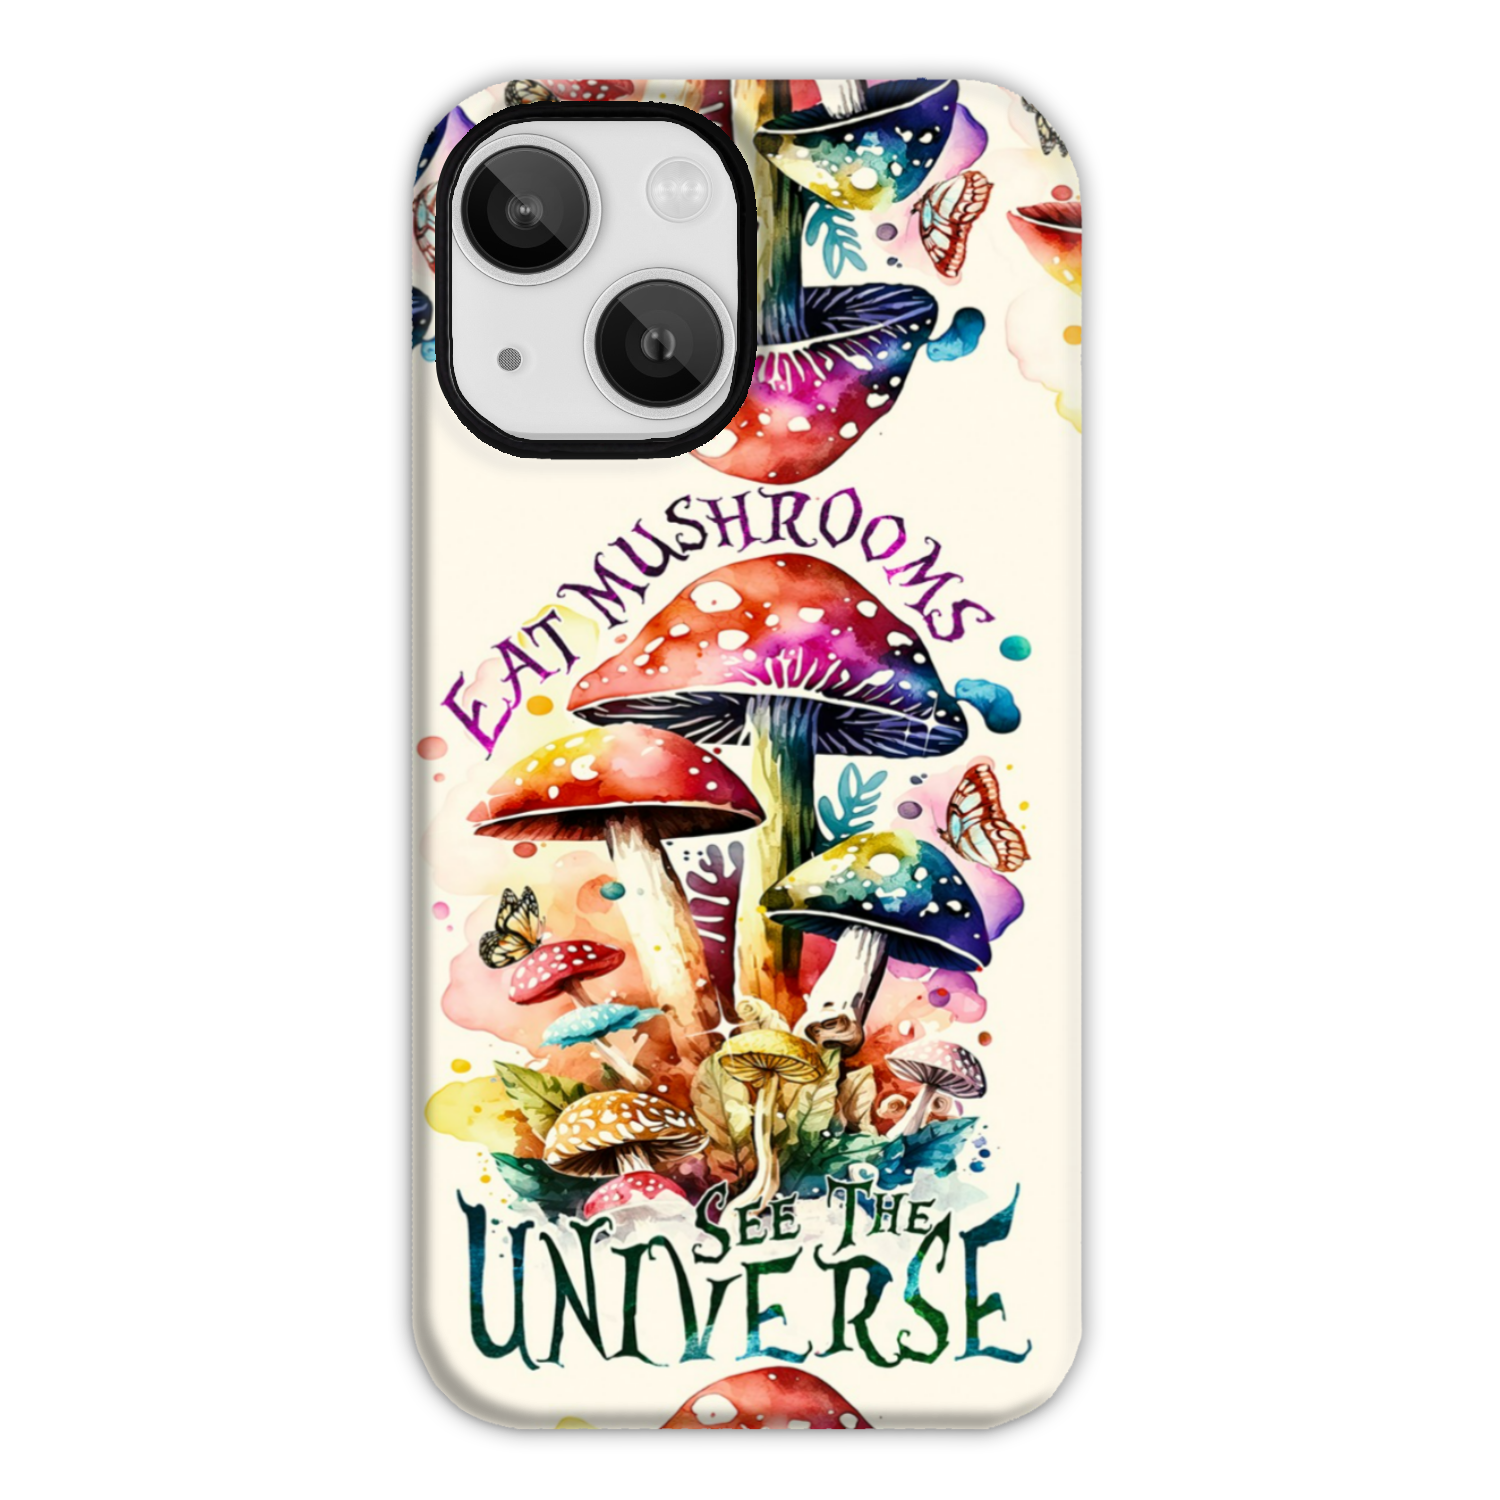 EAT MUSHROOMS SEE THE UNIVERSE PHONE CASE - TY2002231